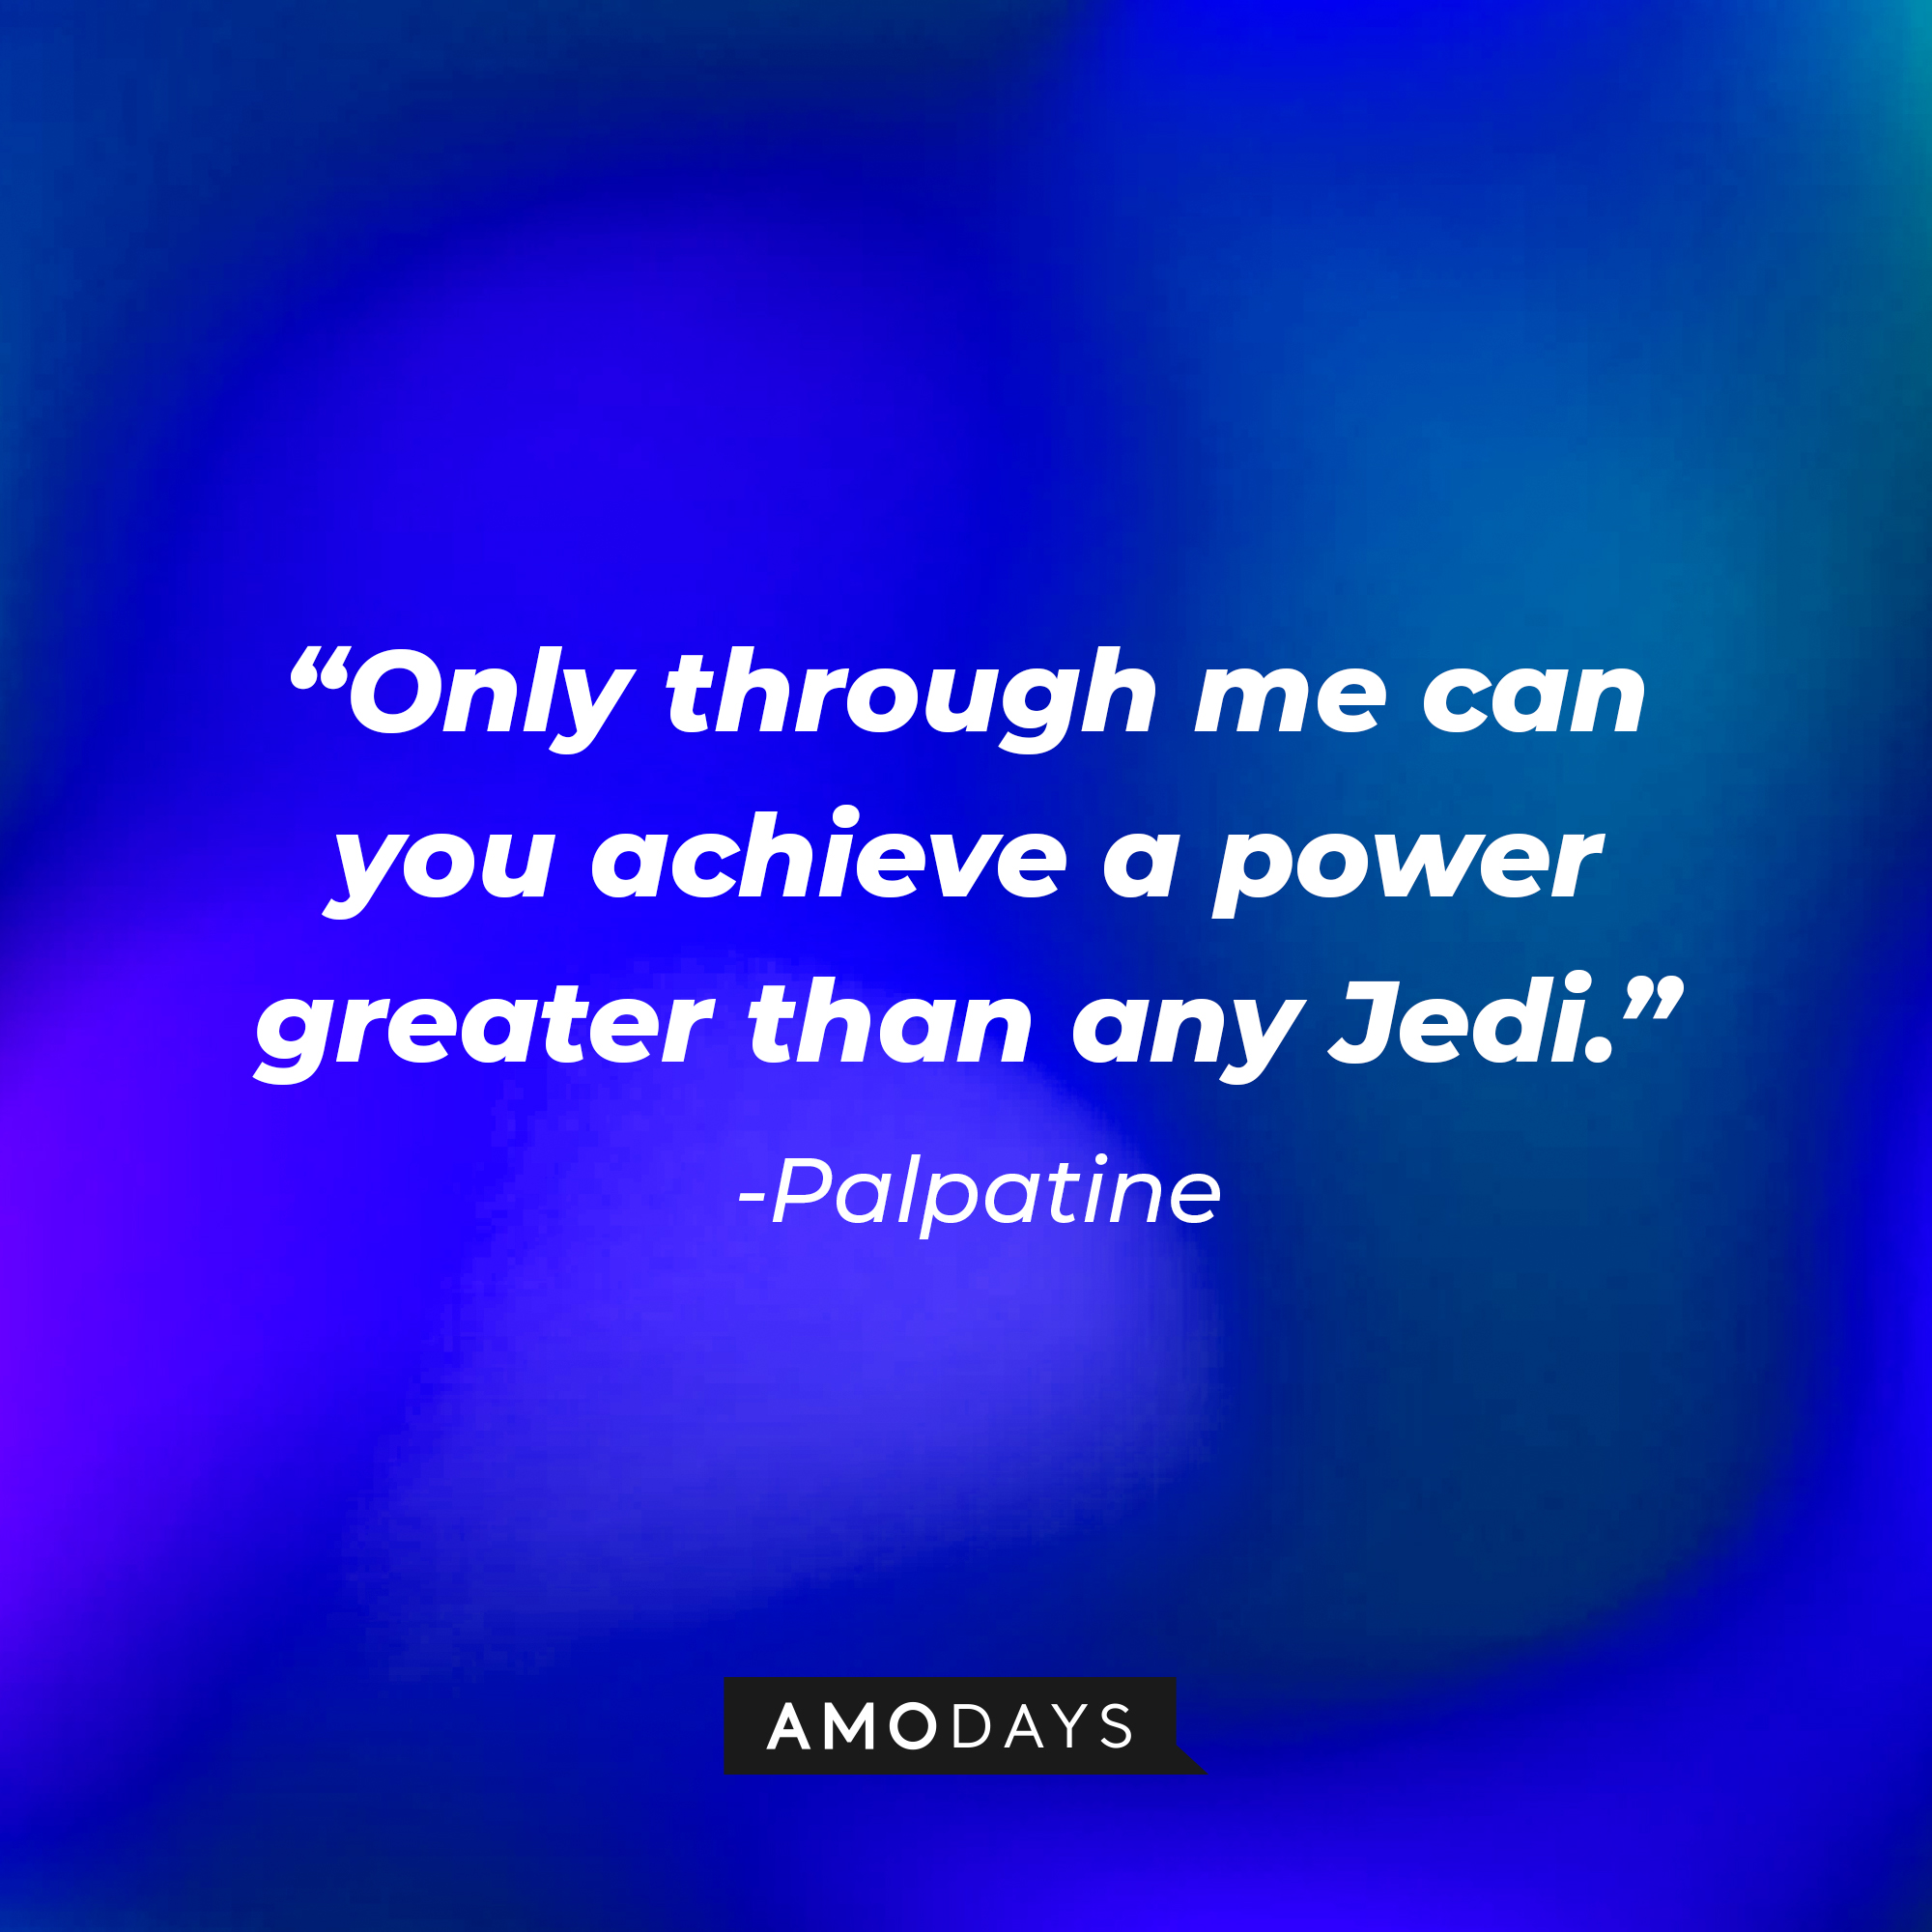 Palpatine’s quote: “Only through me can you achieve a power greater than any Jedi.”  | Source: AmoDays